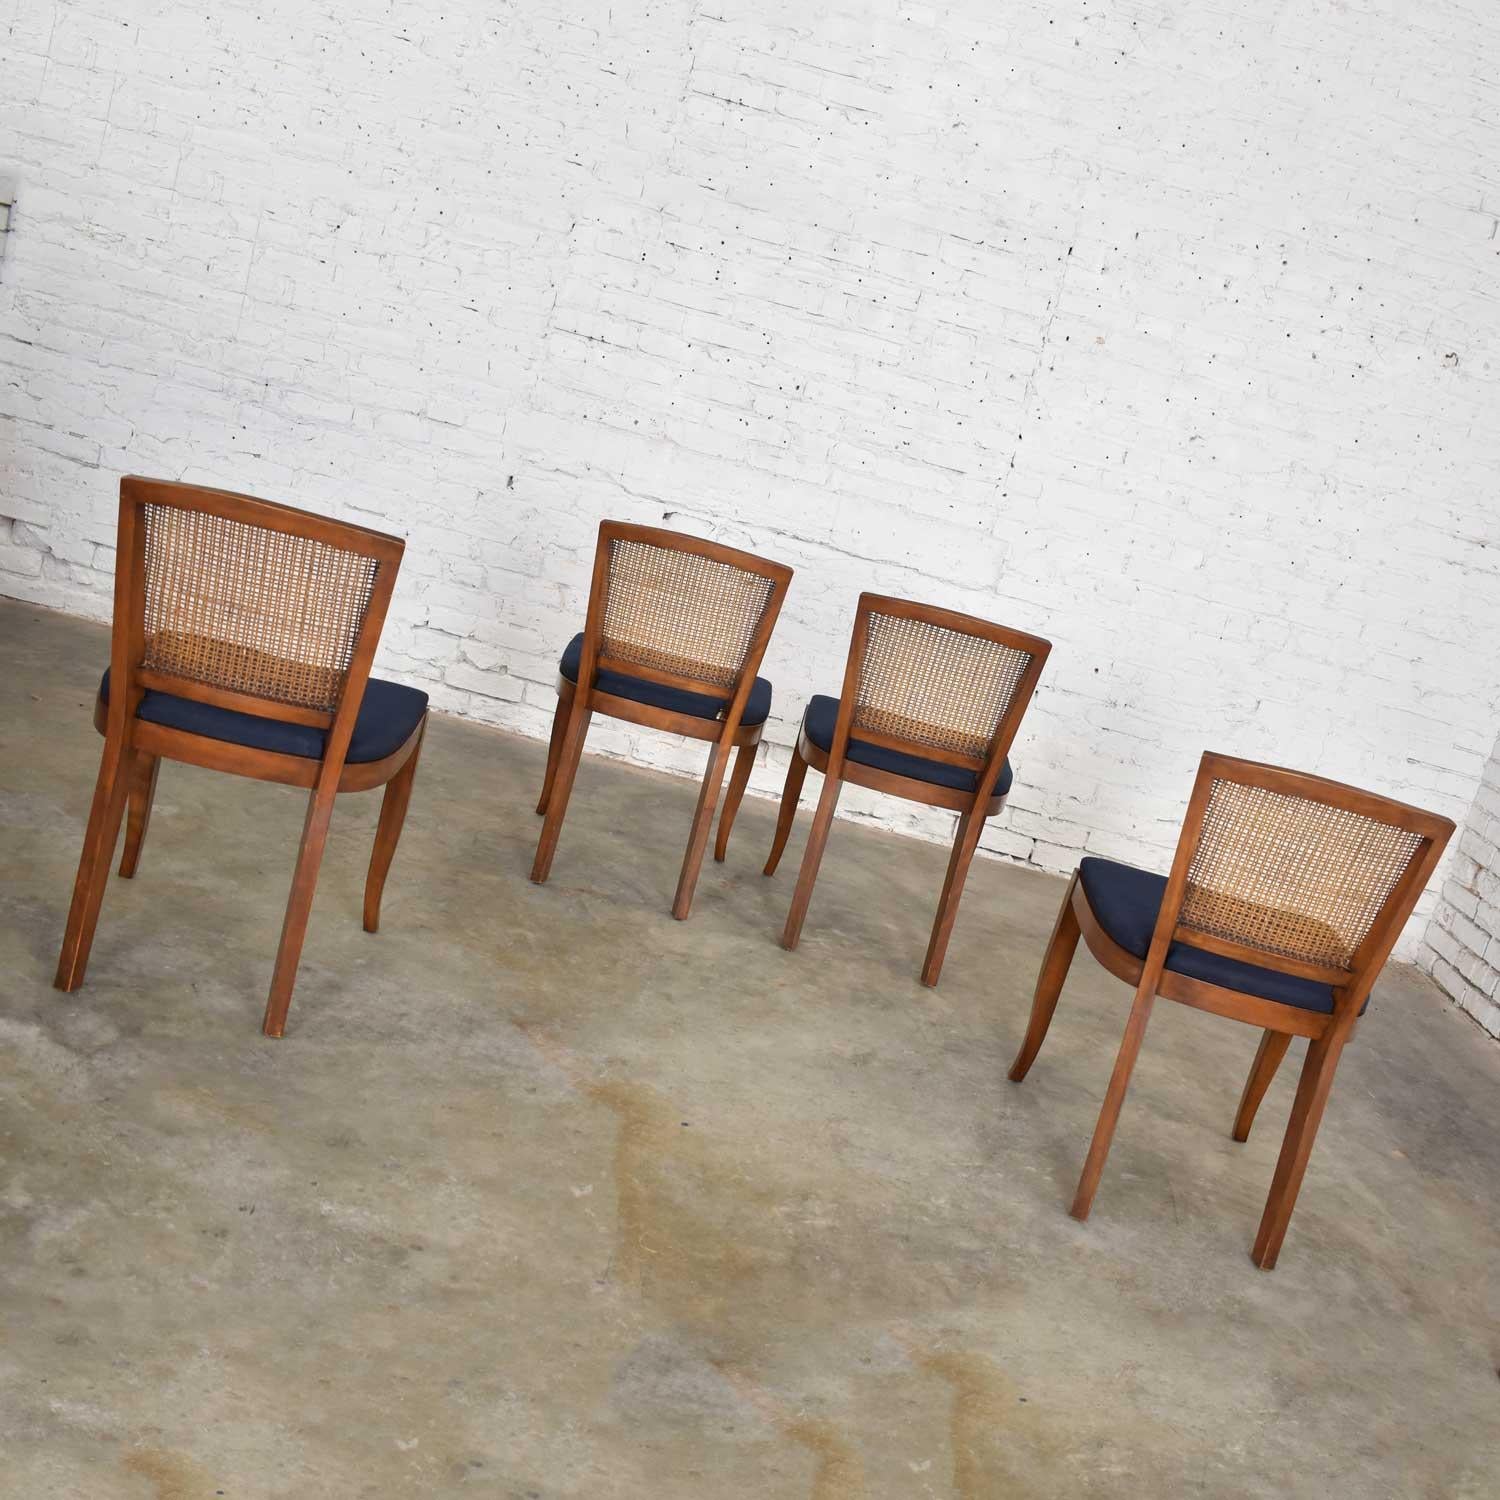 Mid-20th Century Vintage Mid-Century Modern Set of 4 Cane Back Dining Chairs Newly Upholstered